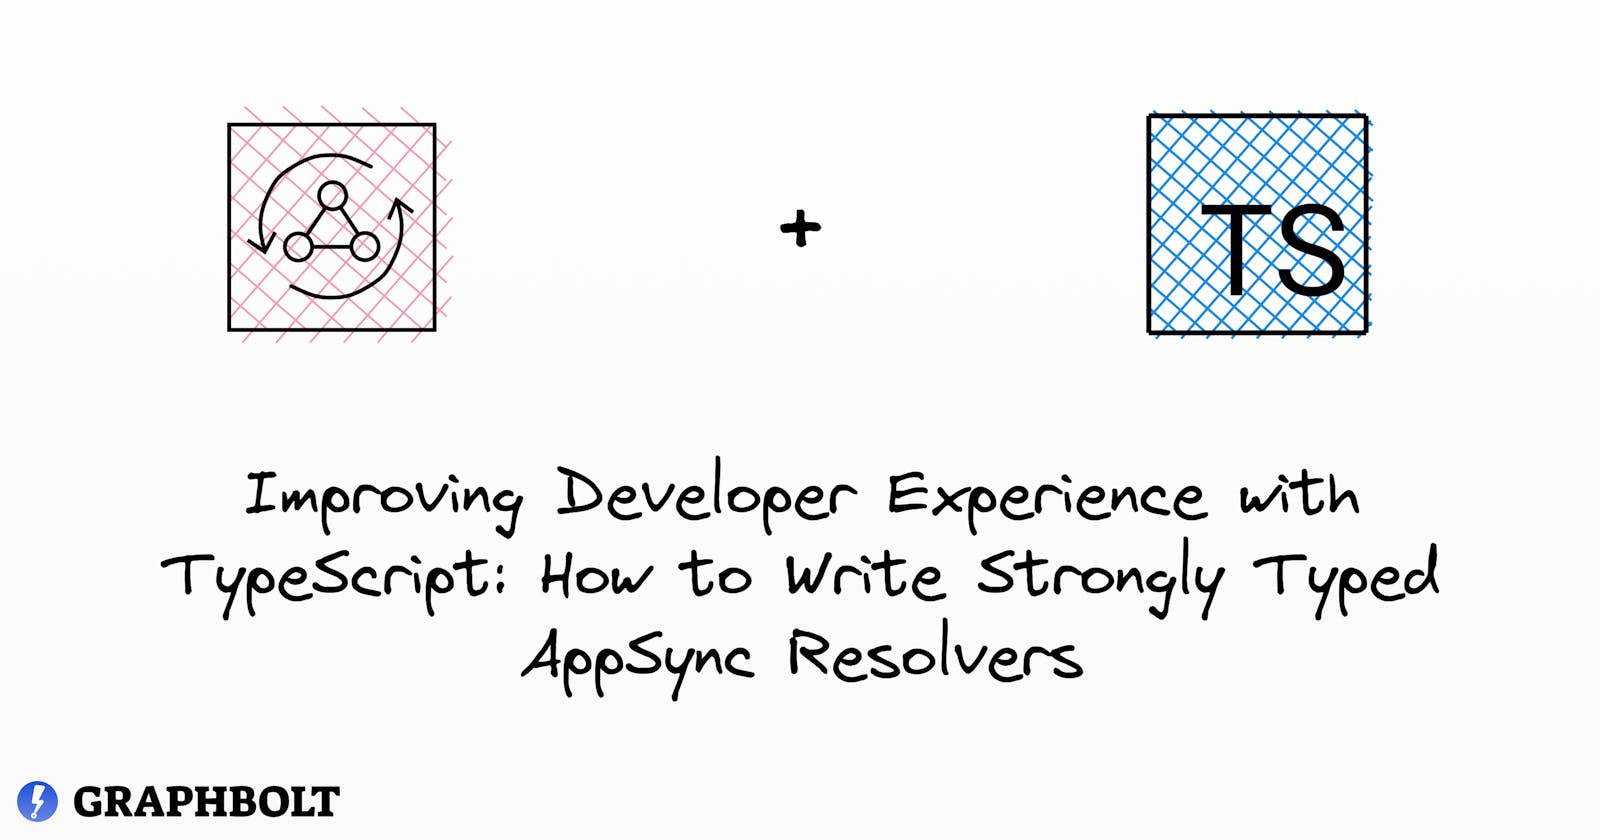 Improving Developer Experience with TypeScript: How to Write Strongly Typed AppSync Resolvers